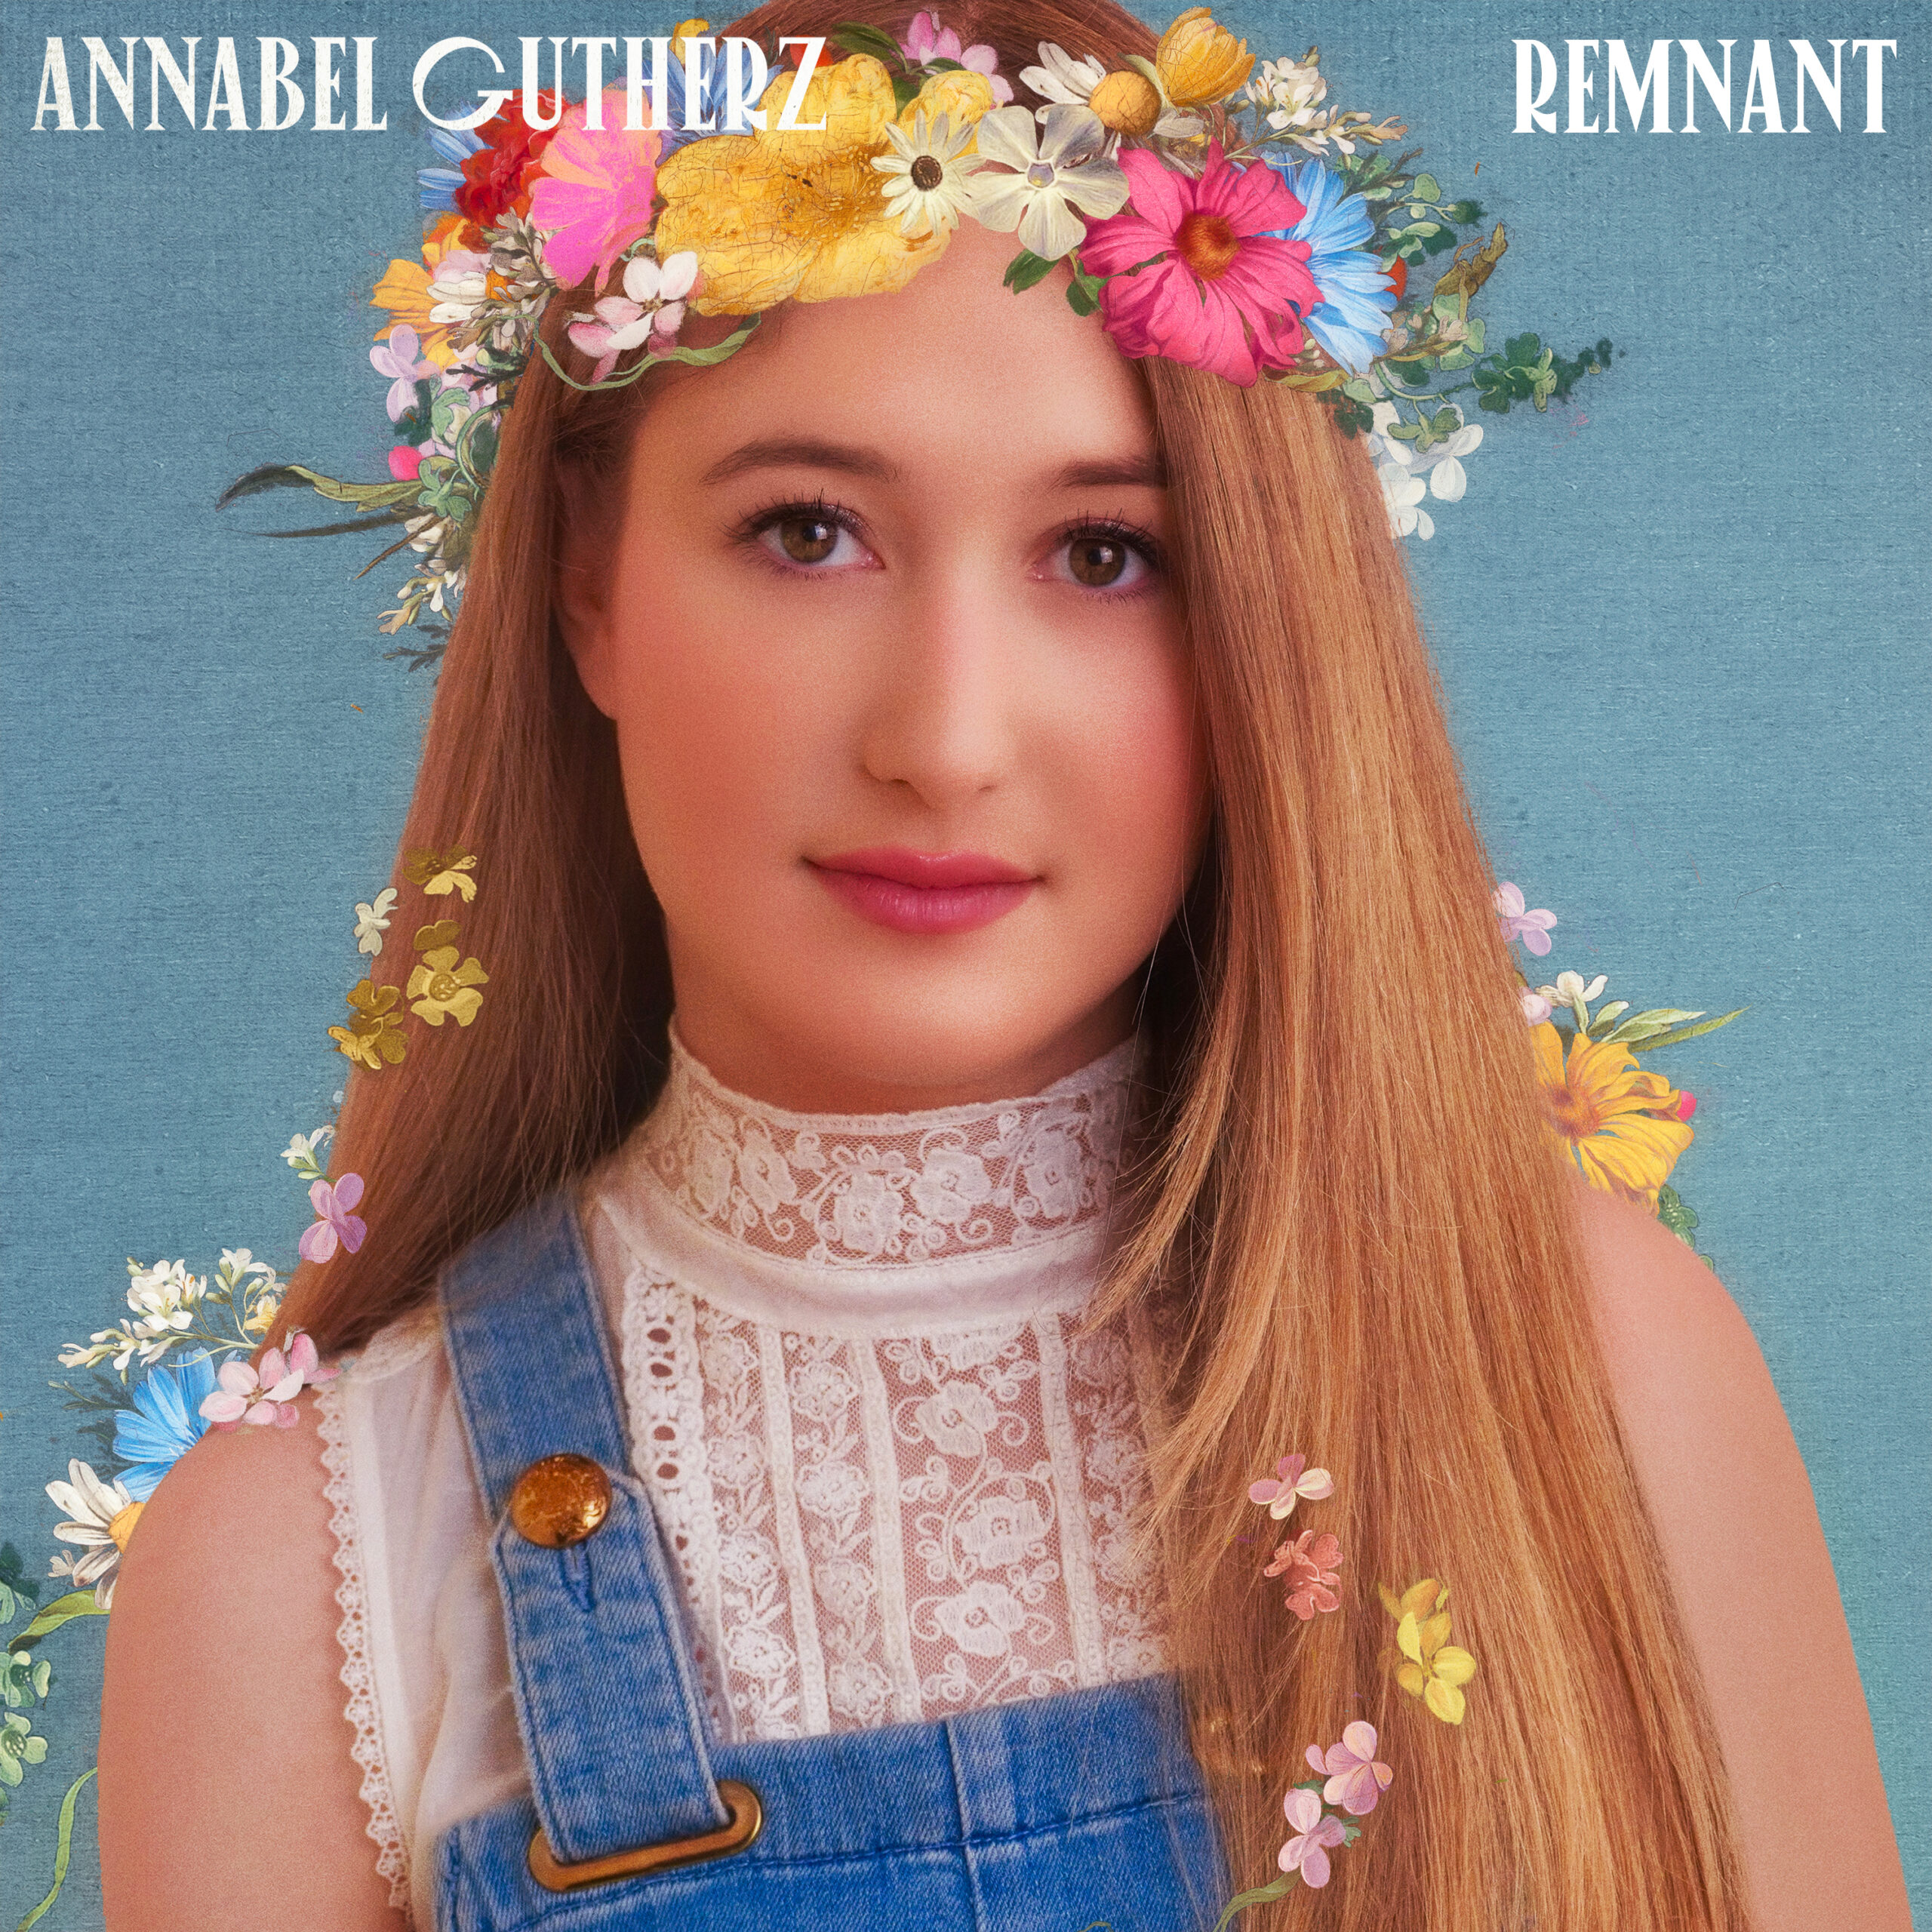 Annabel Gutherz Releases New Single “Remnant,” from ‘Loose Ends’ Album